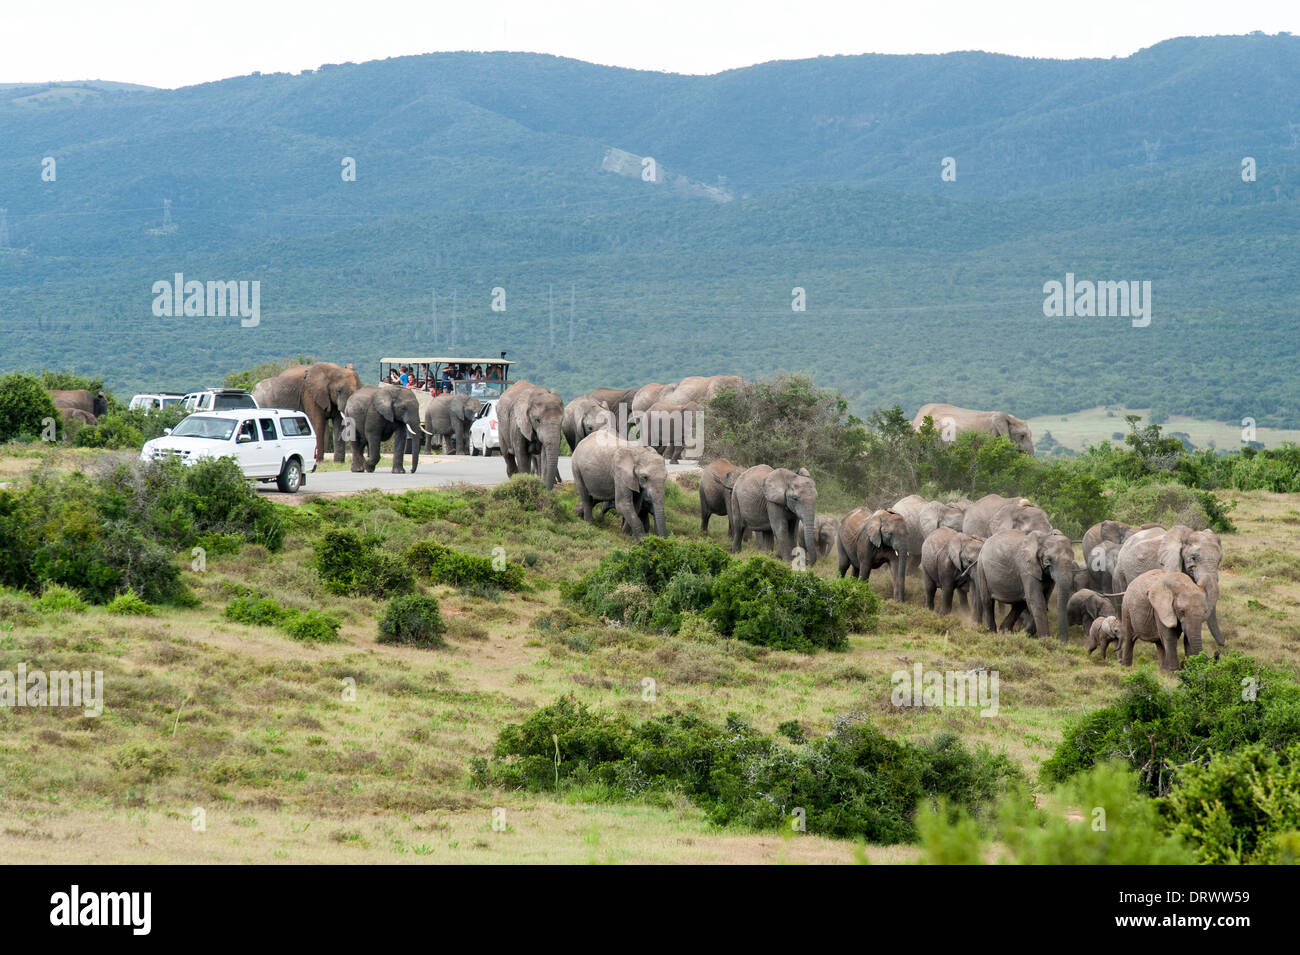 Tourists watching an elephant herd (Loxodonta africana) crossing the road between cars, Addo Elephant Park, South Africa Stock Photo